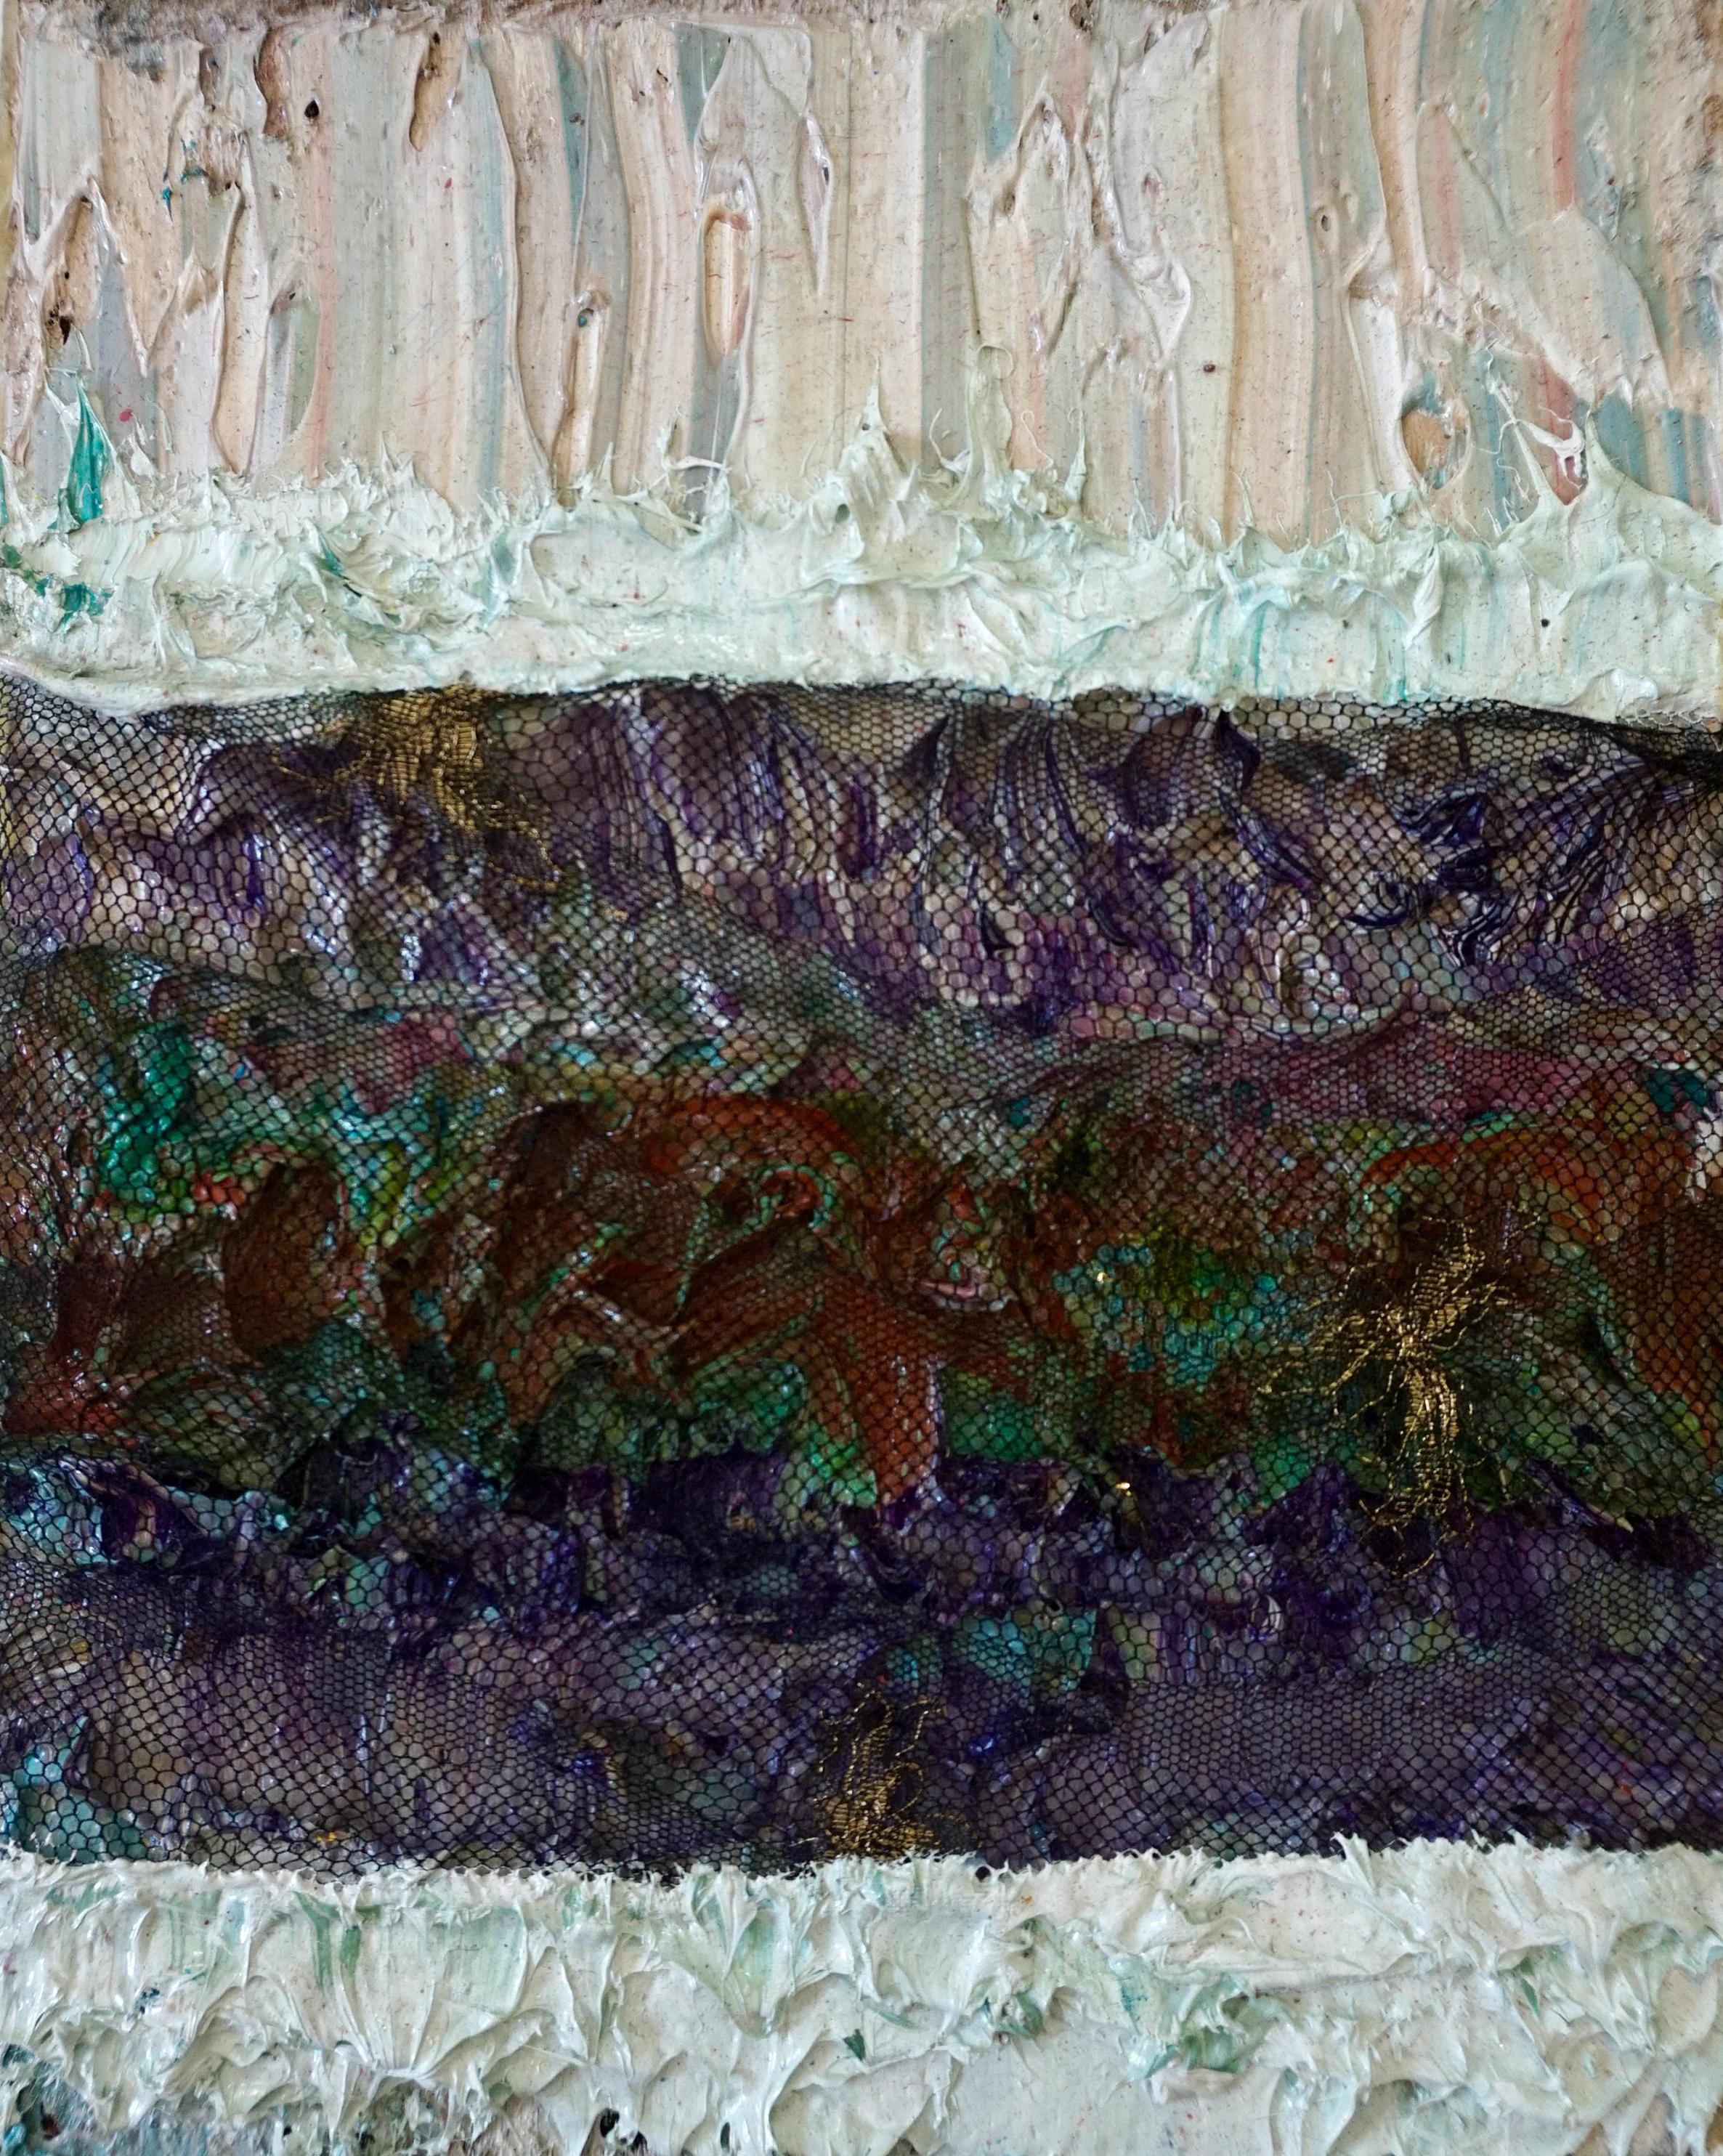 Tactile memory #128. Mixed media oil, acrylic, and lace on Canvas